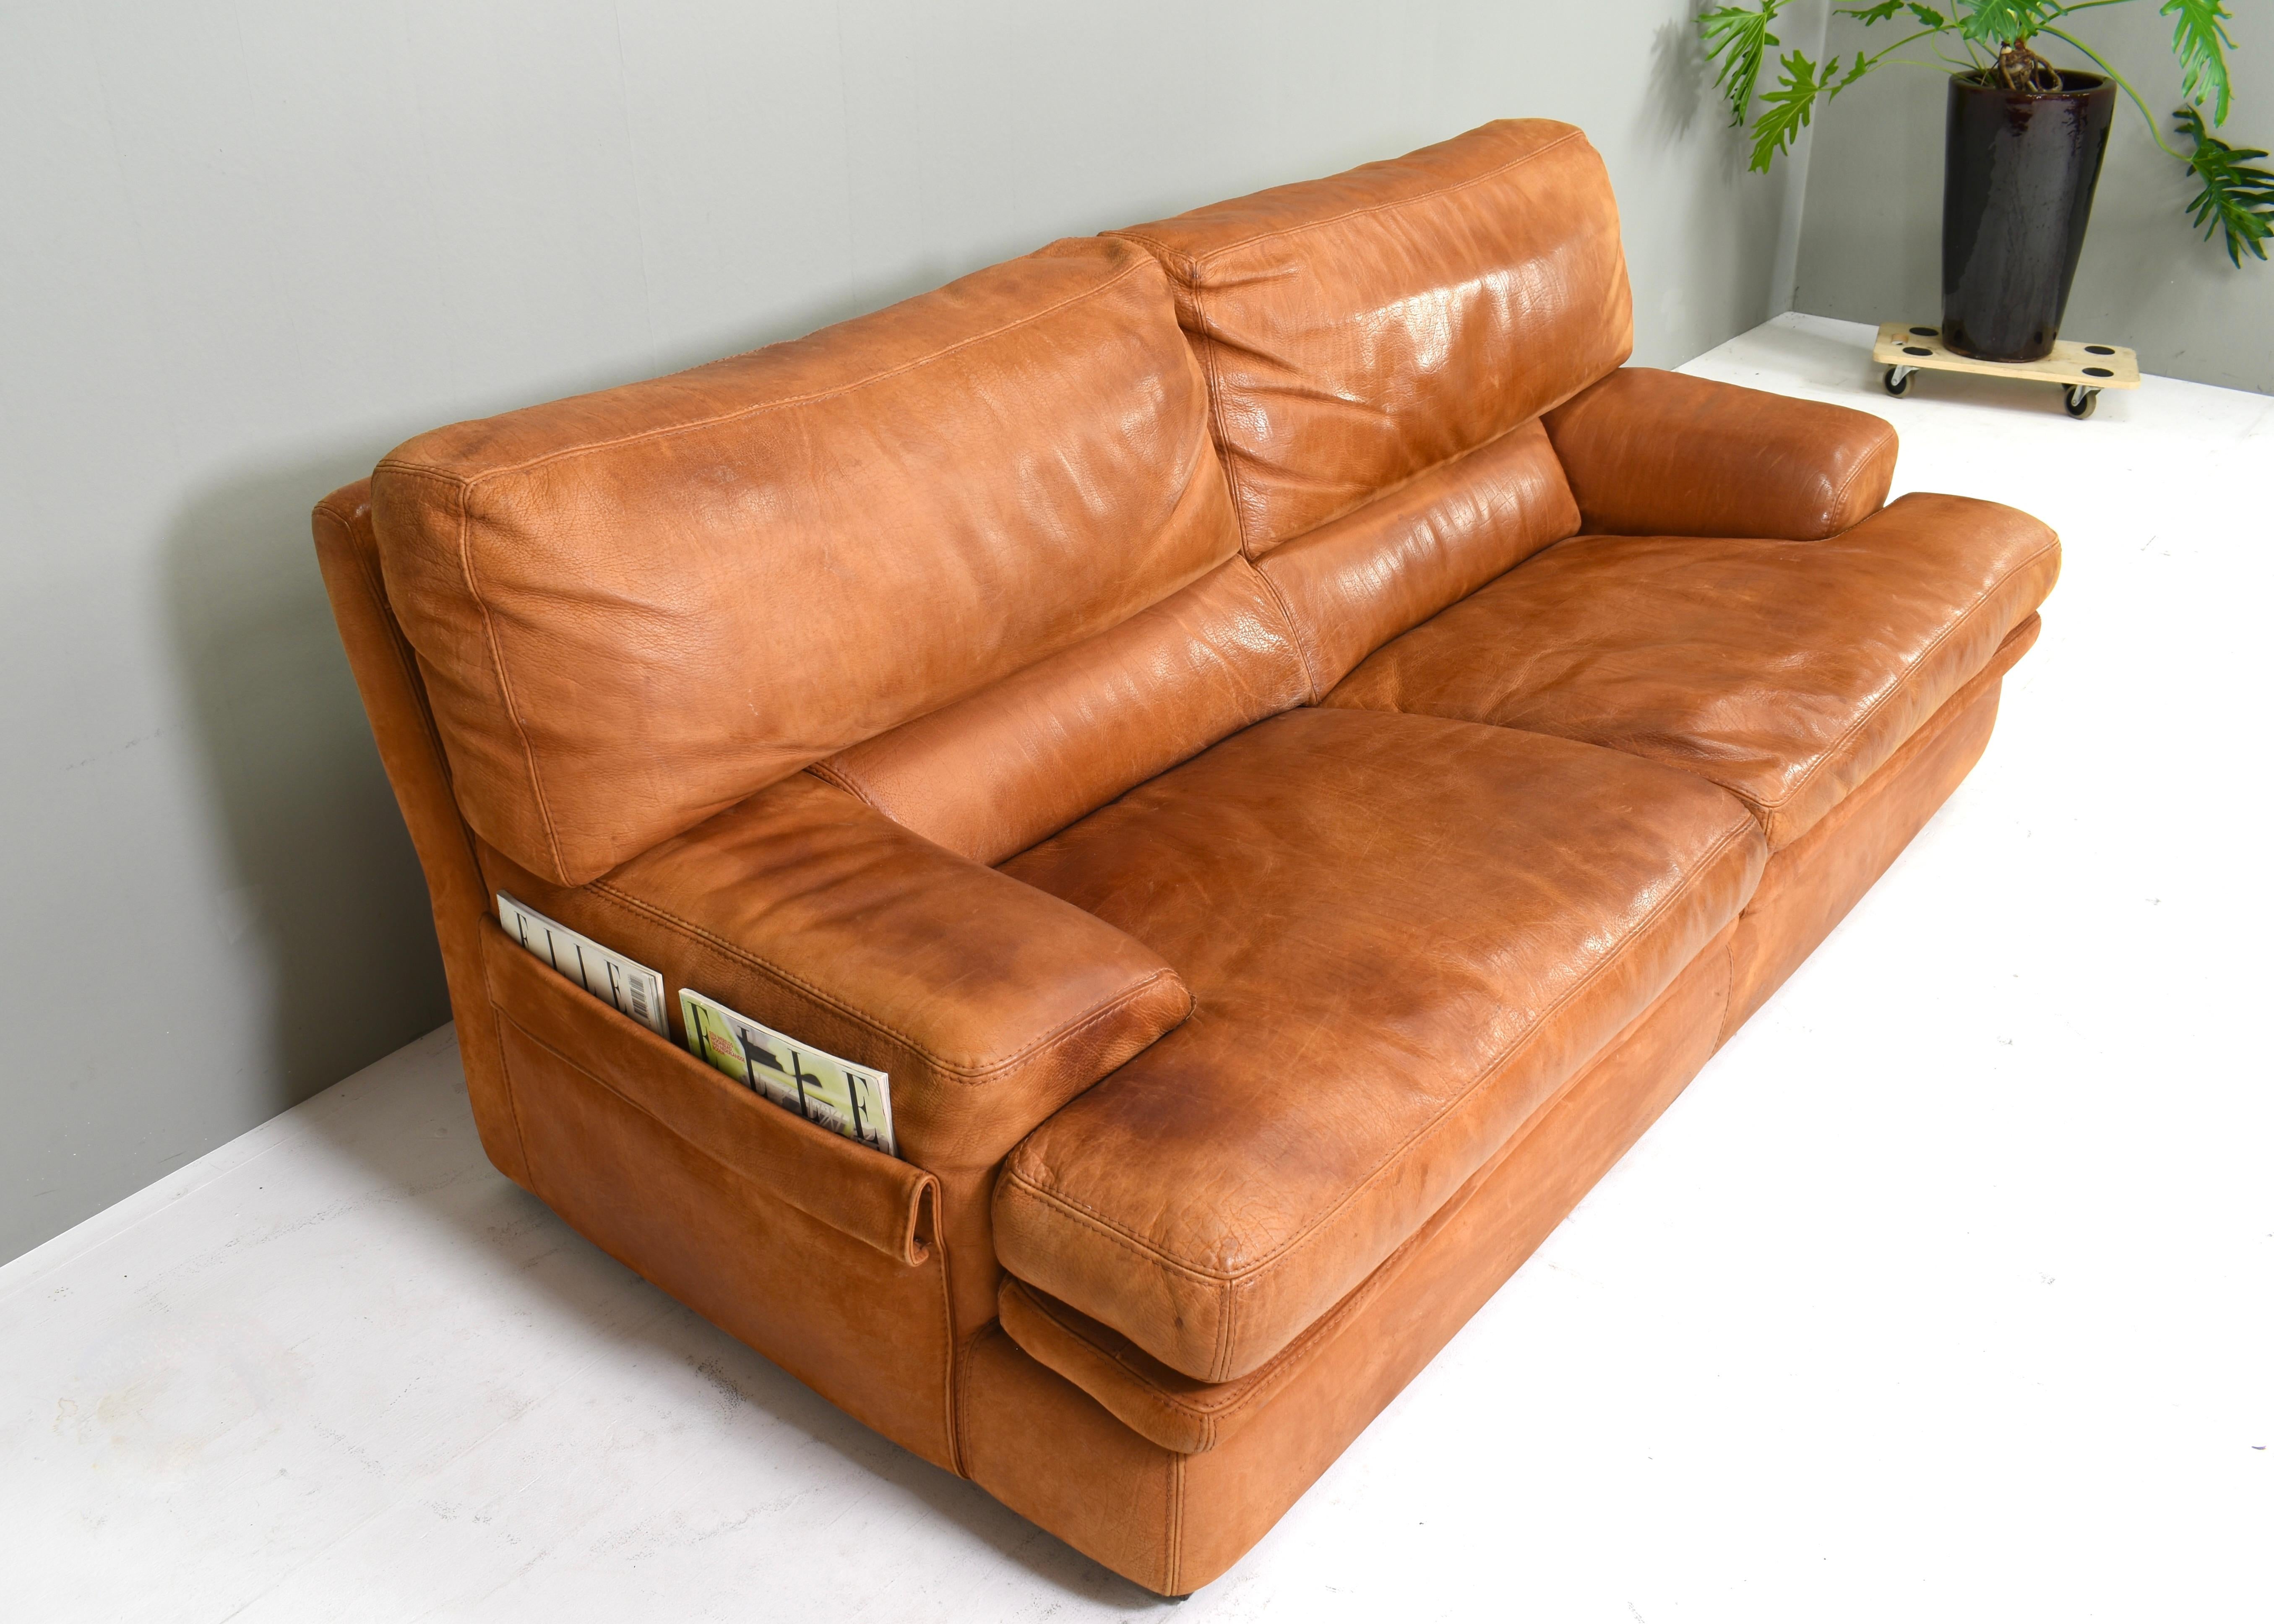 Roche Bobois Leather Sofa – A Masterpiece of French Artistry and Comfort

Experience the pinnacle of luxury and design with the Roche Bobois Leather Sofa, a true masterpiece that fuses French artistry with unparalleled comfort. Crafted with